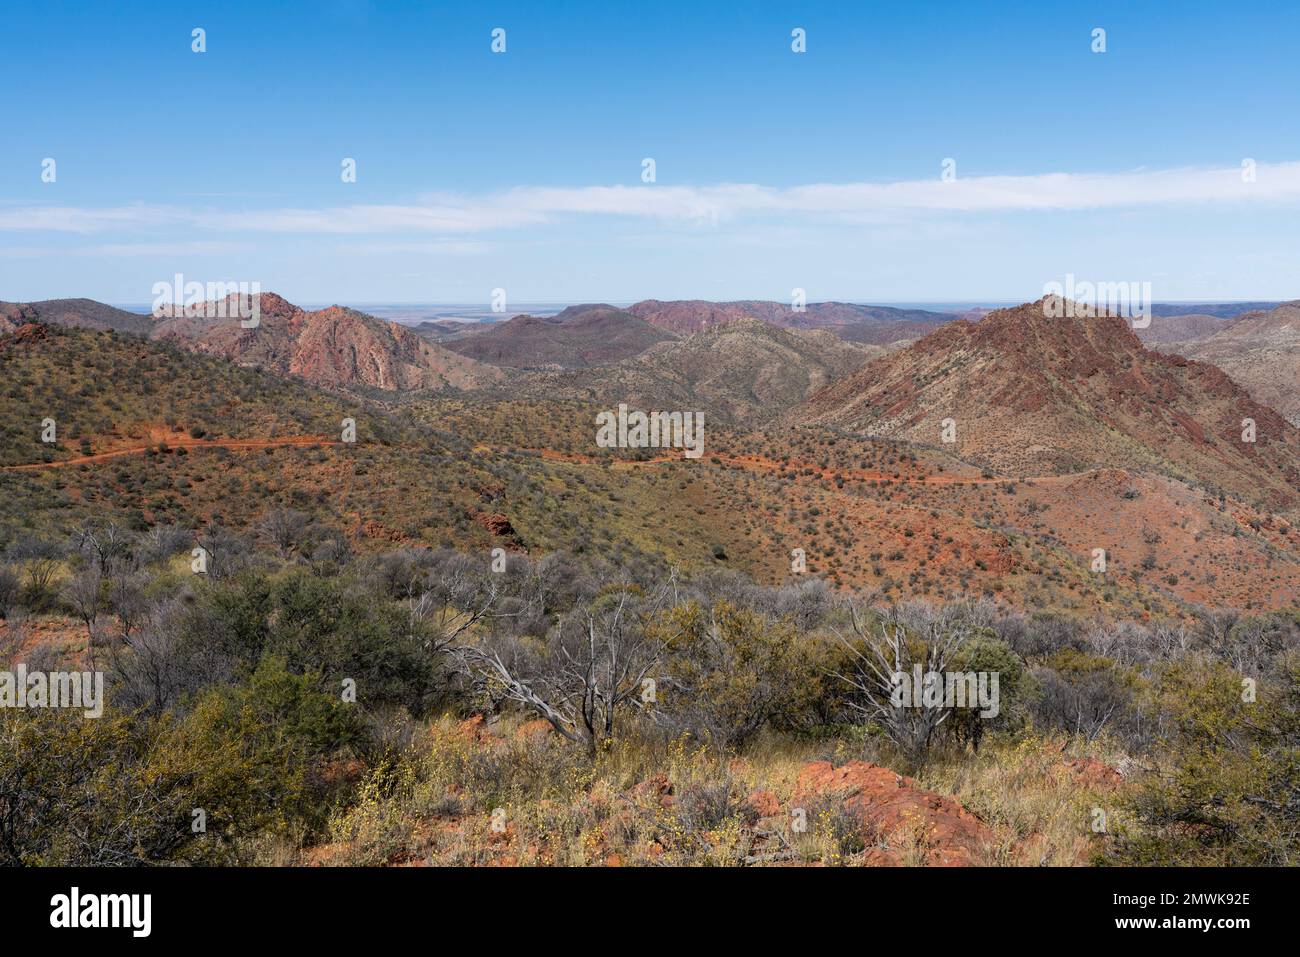 A view from Coulthard Lookout, Arkaroola, South Australia. Stock Photo